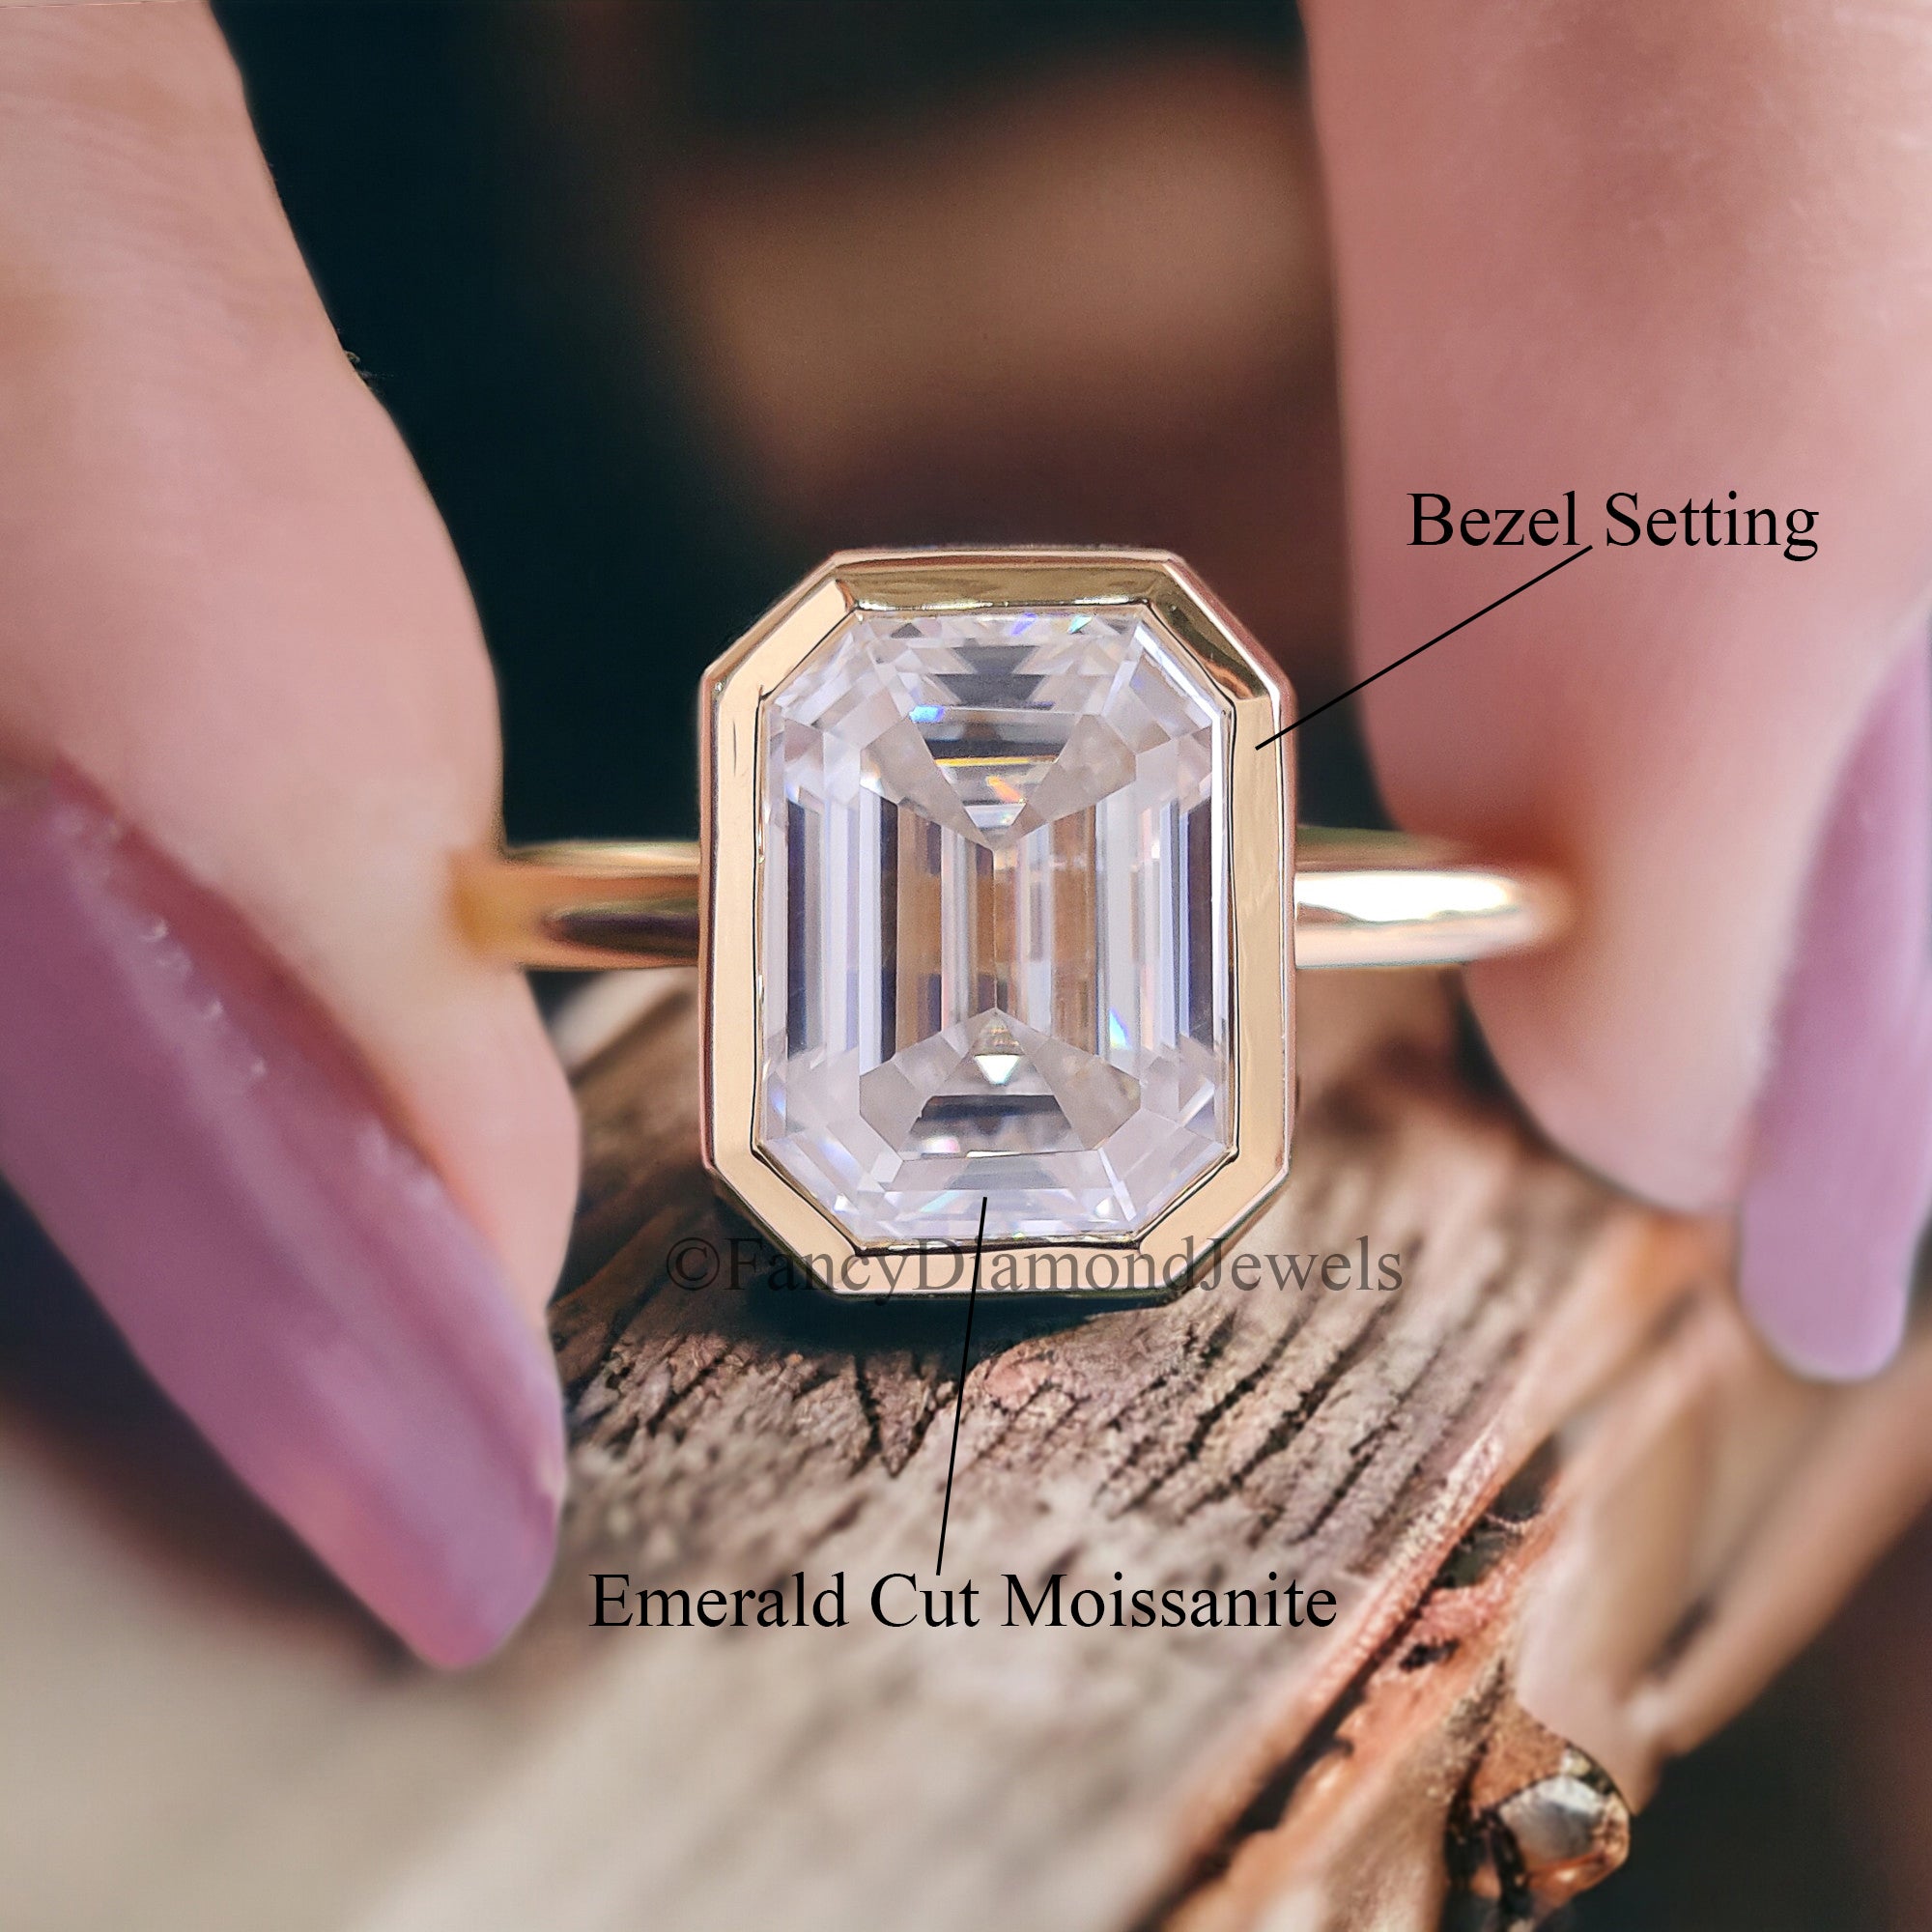 2.5 CT Emerald Cut Moissanite Solitaire Ring 14K Yellow Gold Engagement Ring Bezel Setting Statement Ring Gift For Her Anniversary Ring FD48